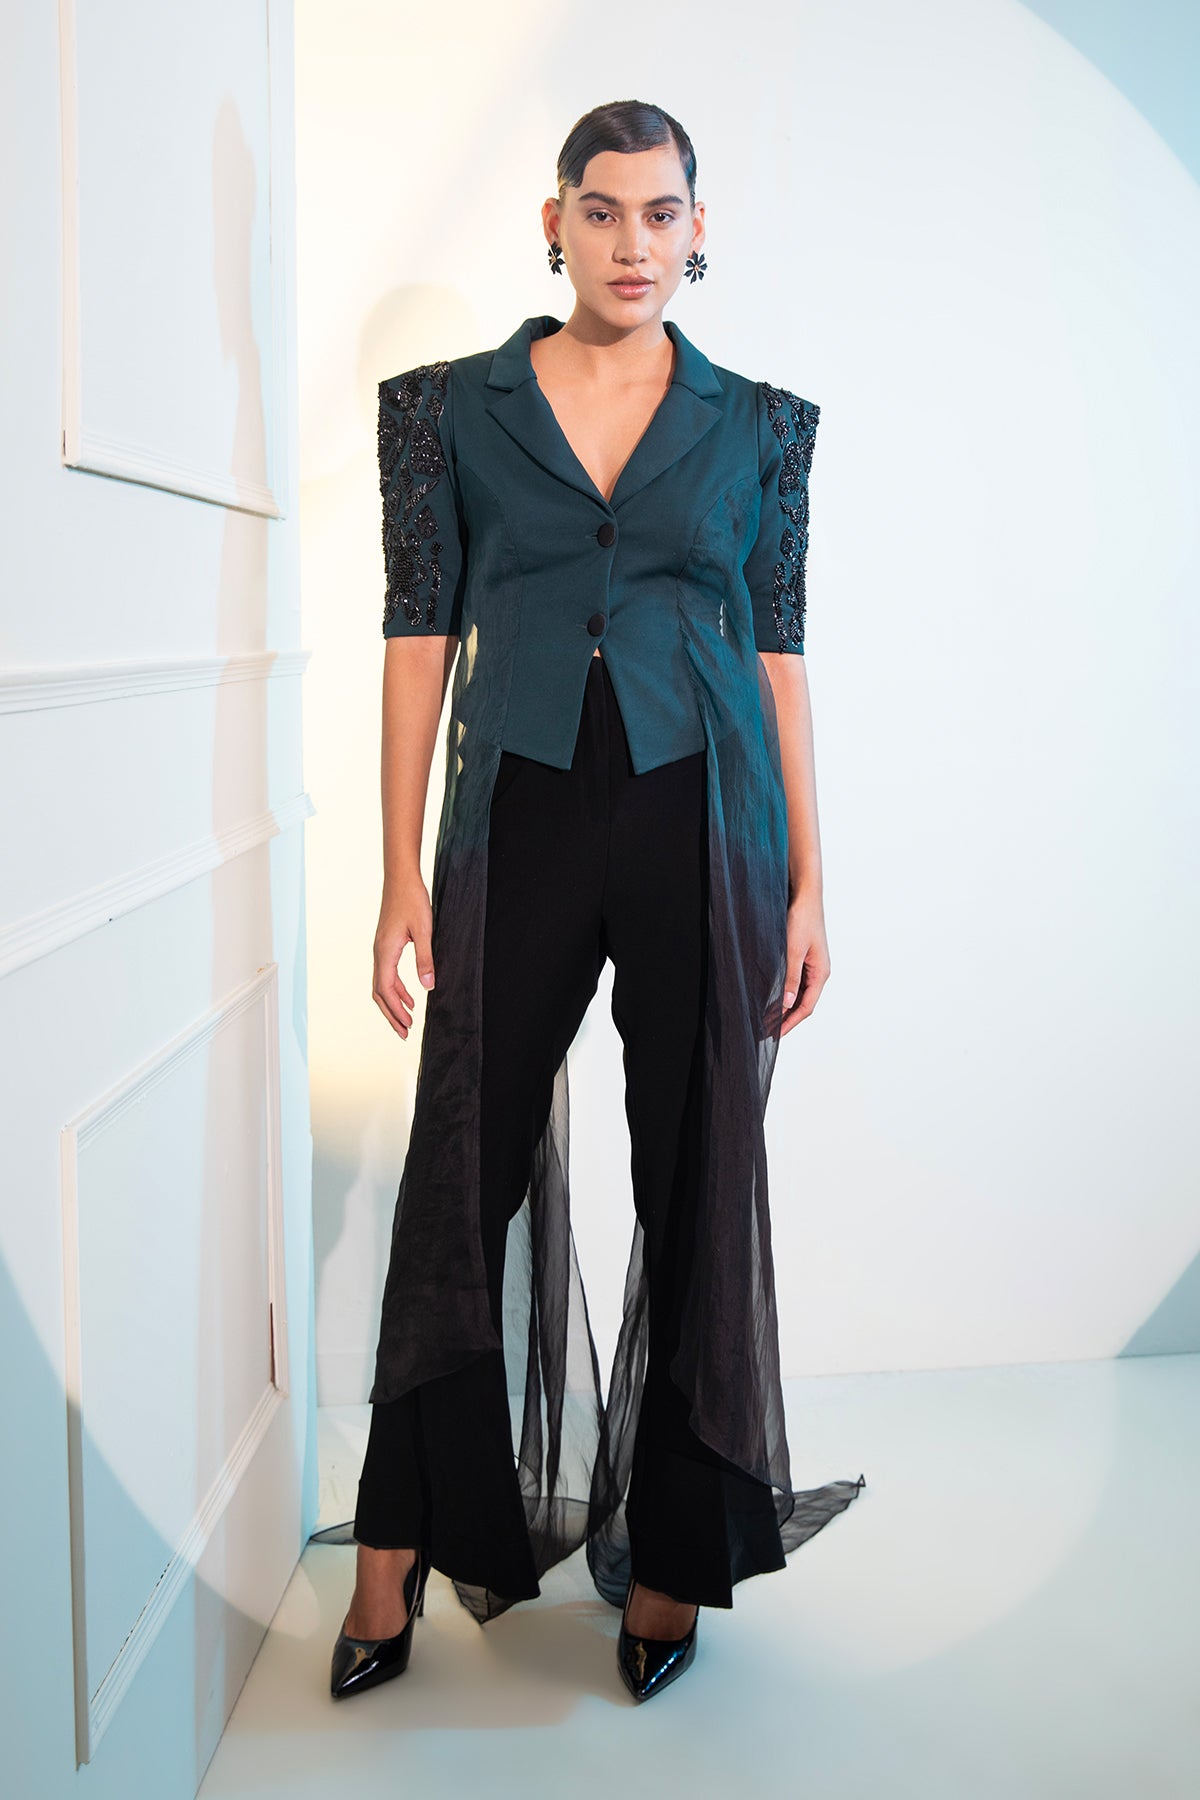 Green Ombre Draped Blazer with embellished puff sleeves & tailored pants Co-ord set